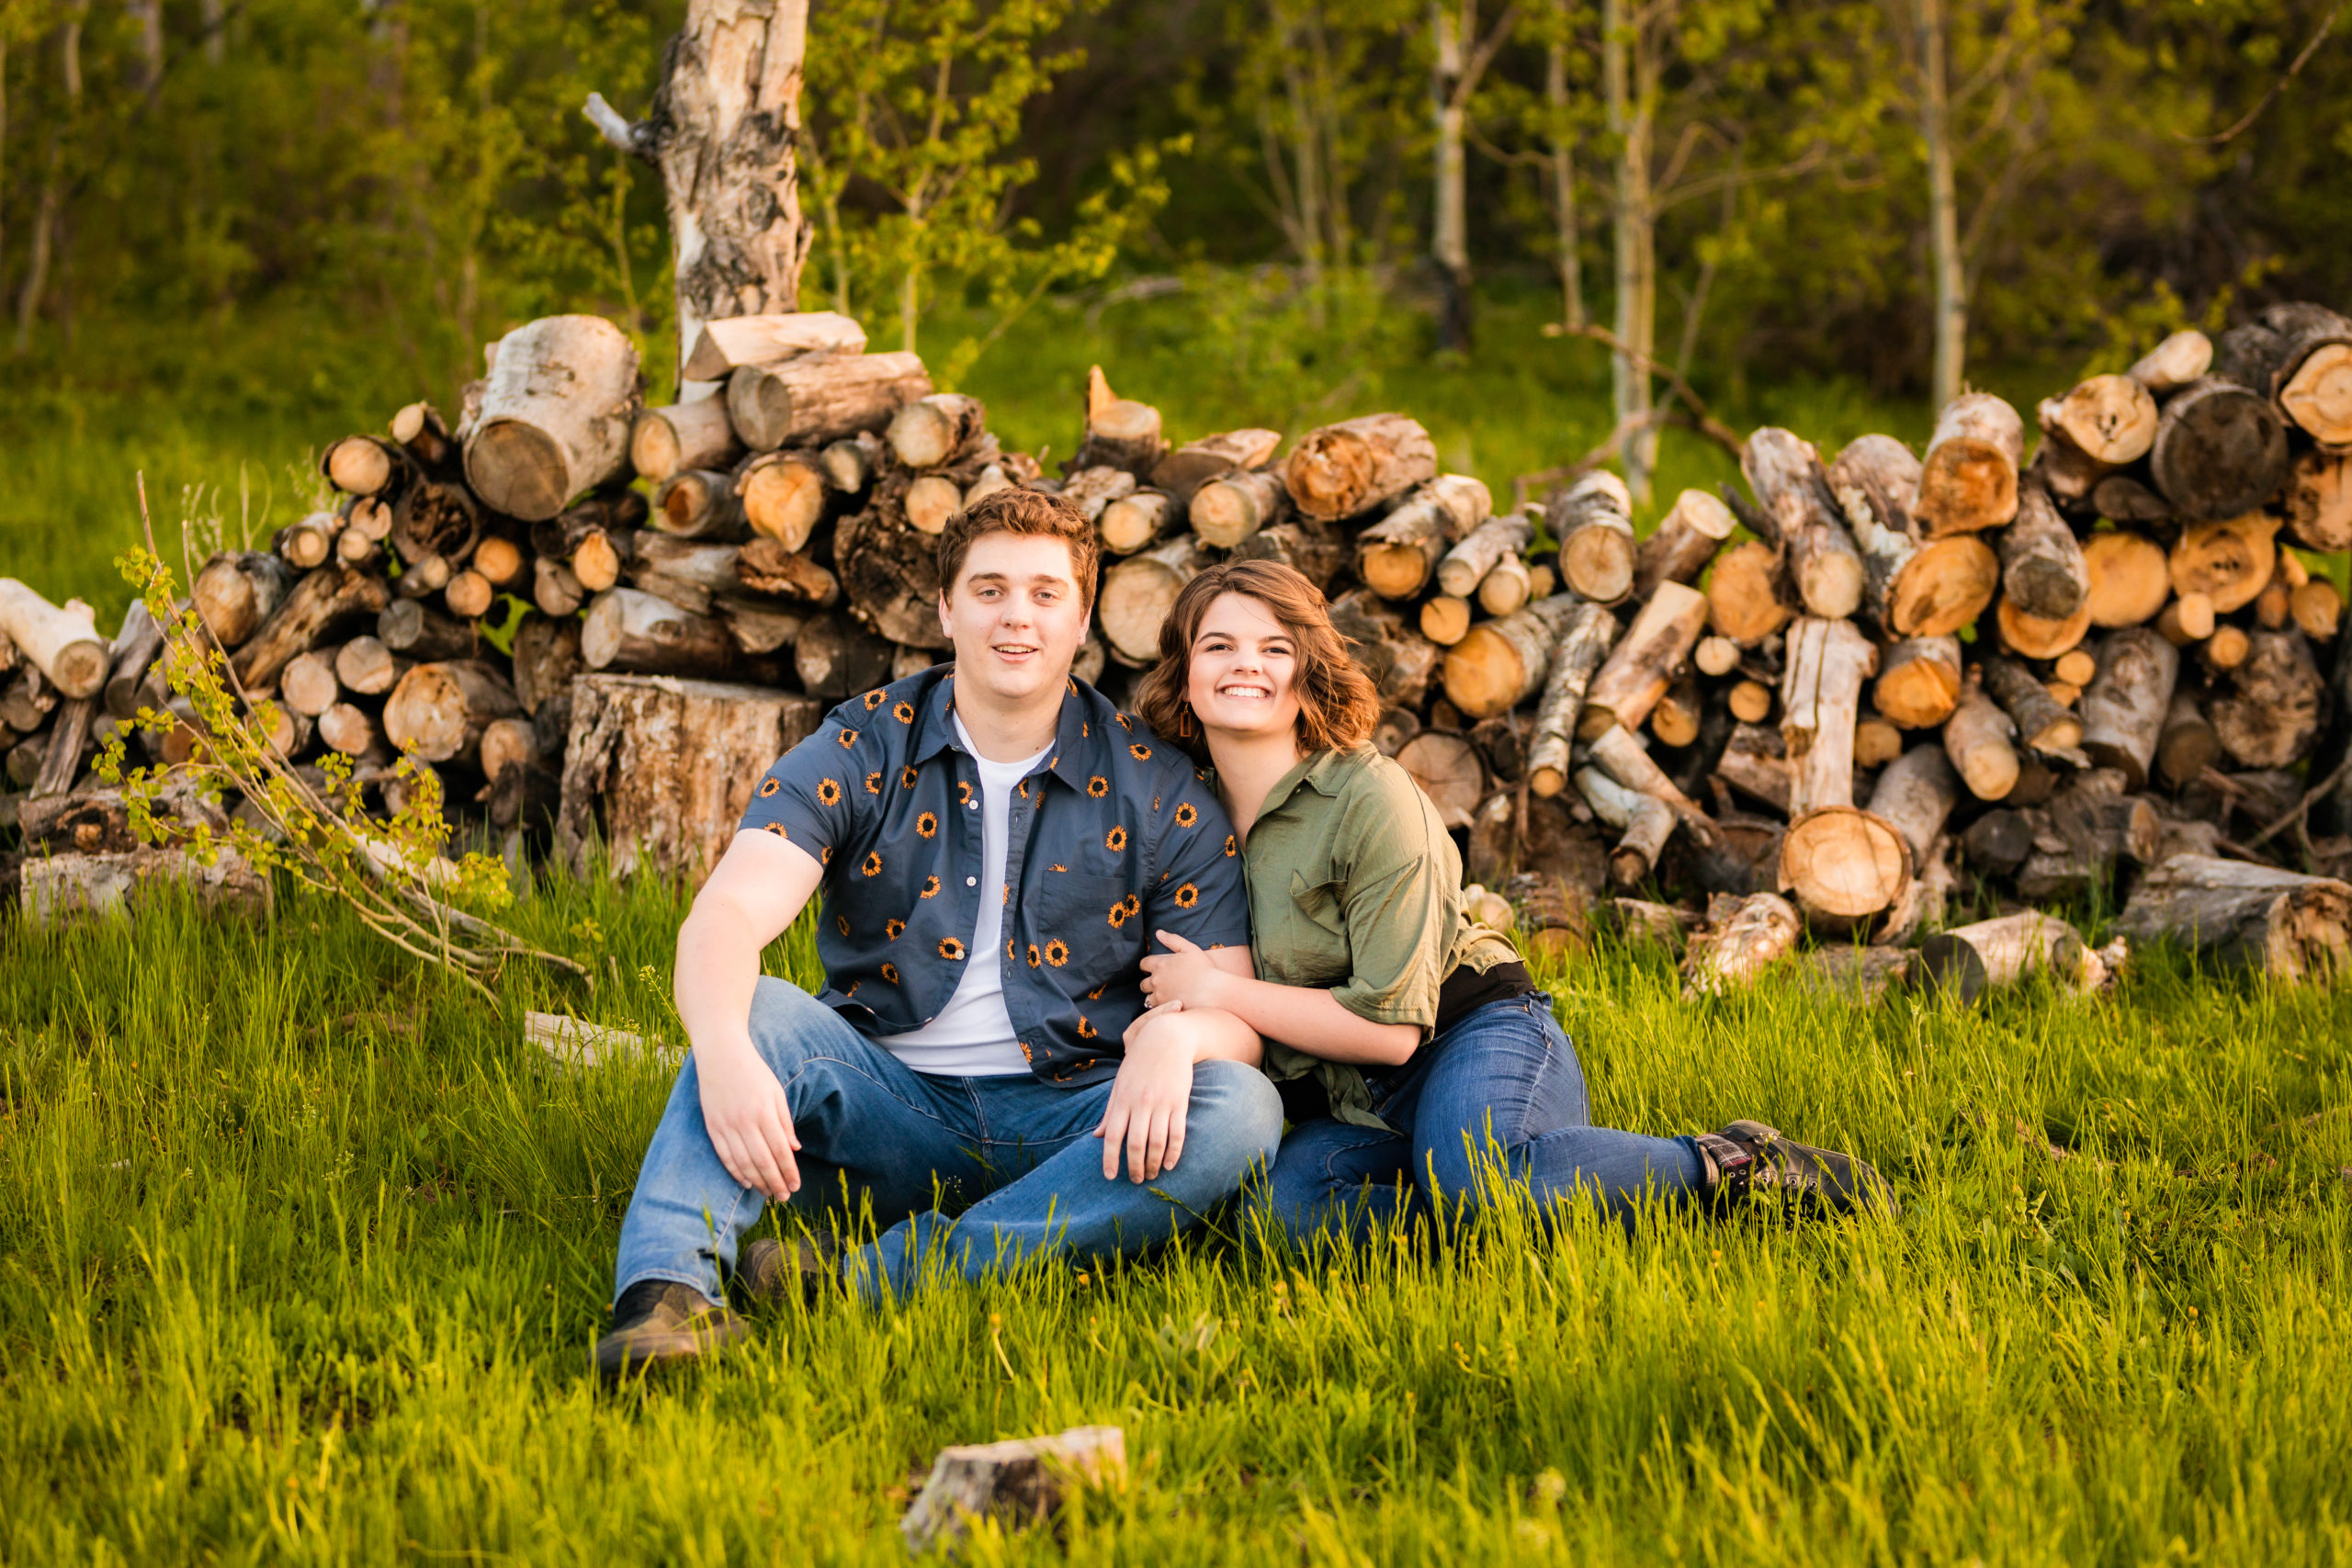 engaged couple sitting in grass during outdoor engagements